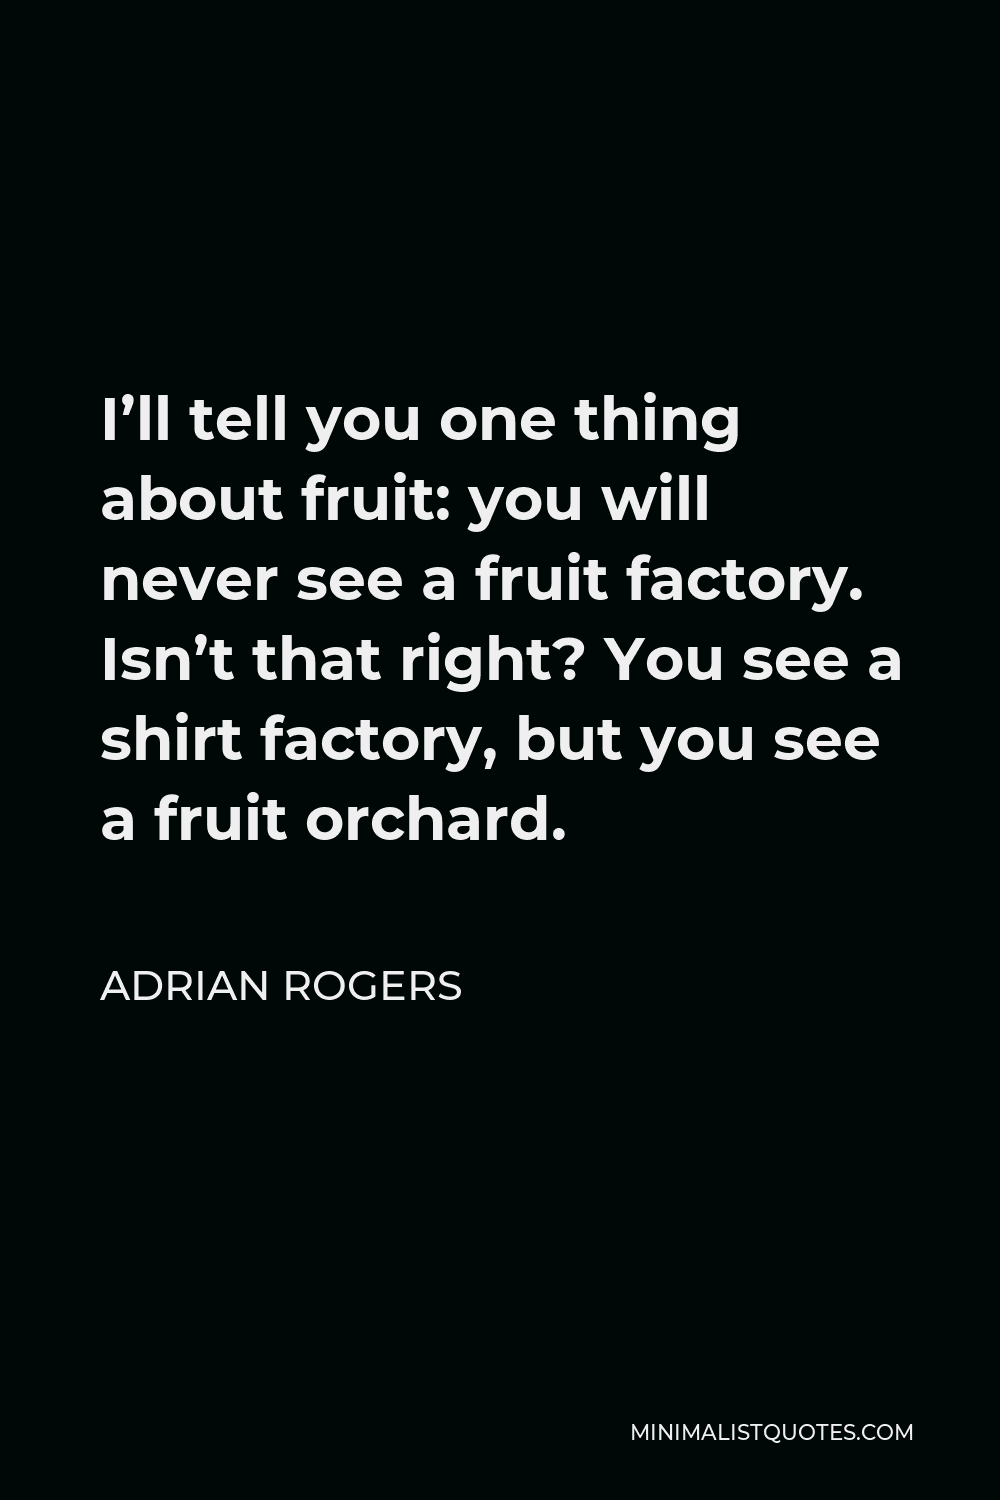 Adrian Rogers Quote - I’ll tell you one thing about fruit: you will never see a fruit factory. Isn’t that right? You see a shirt factory, but you see a fruit orchard.